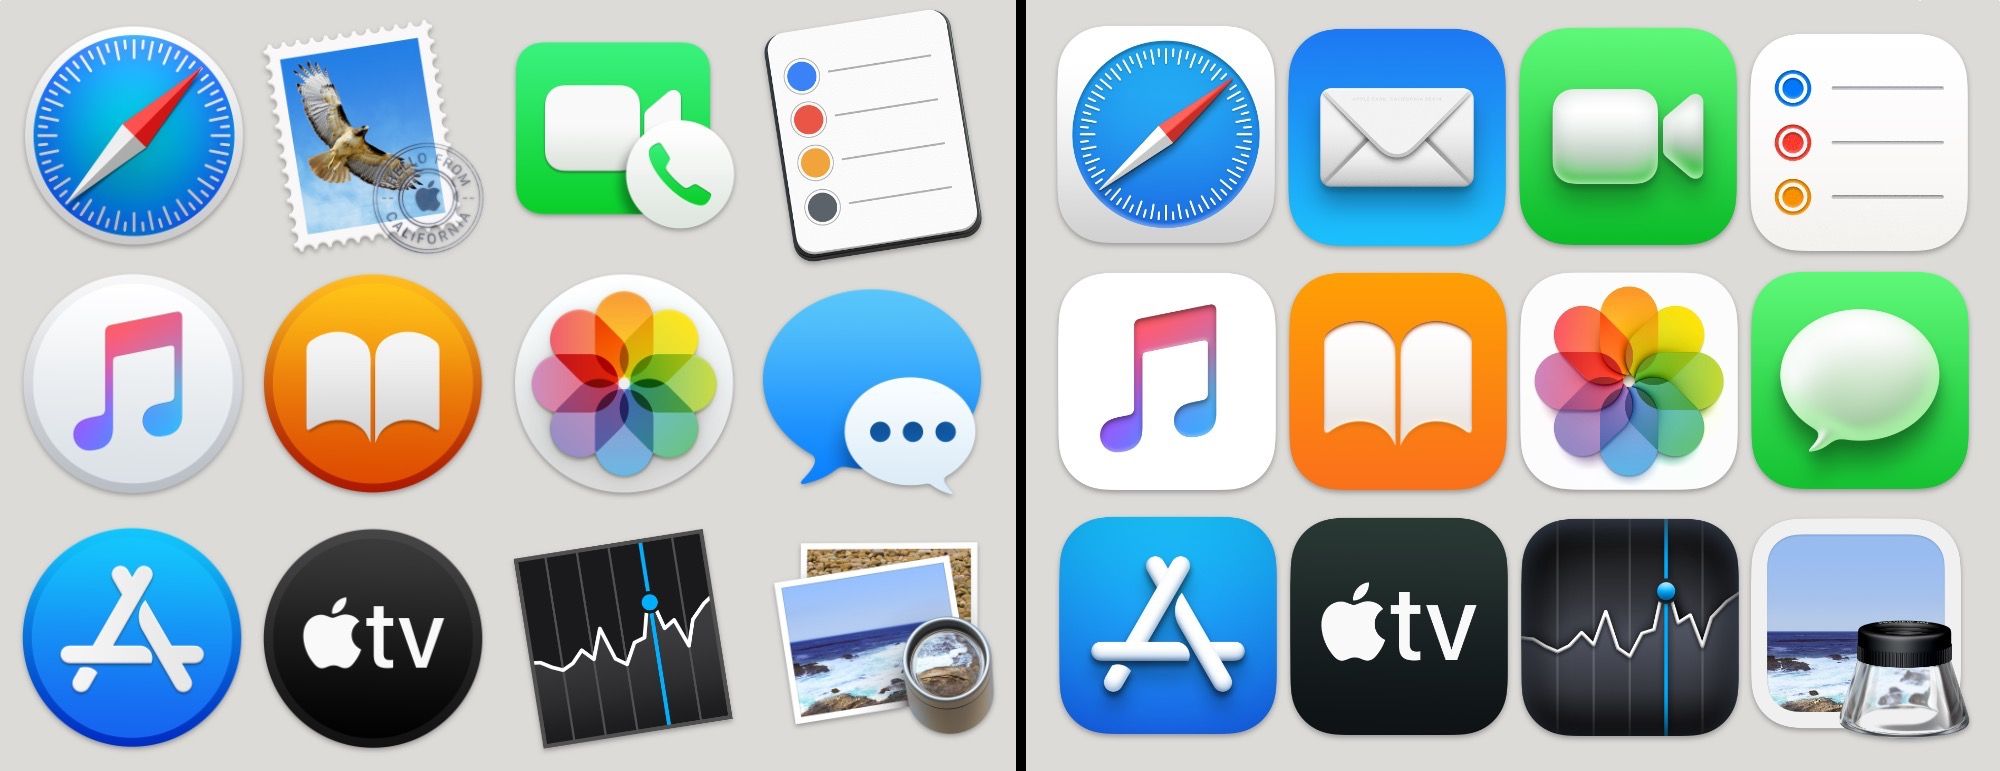 New macOS, new style of icons, new trend in UI design